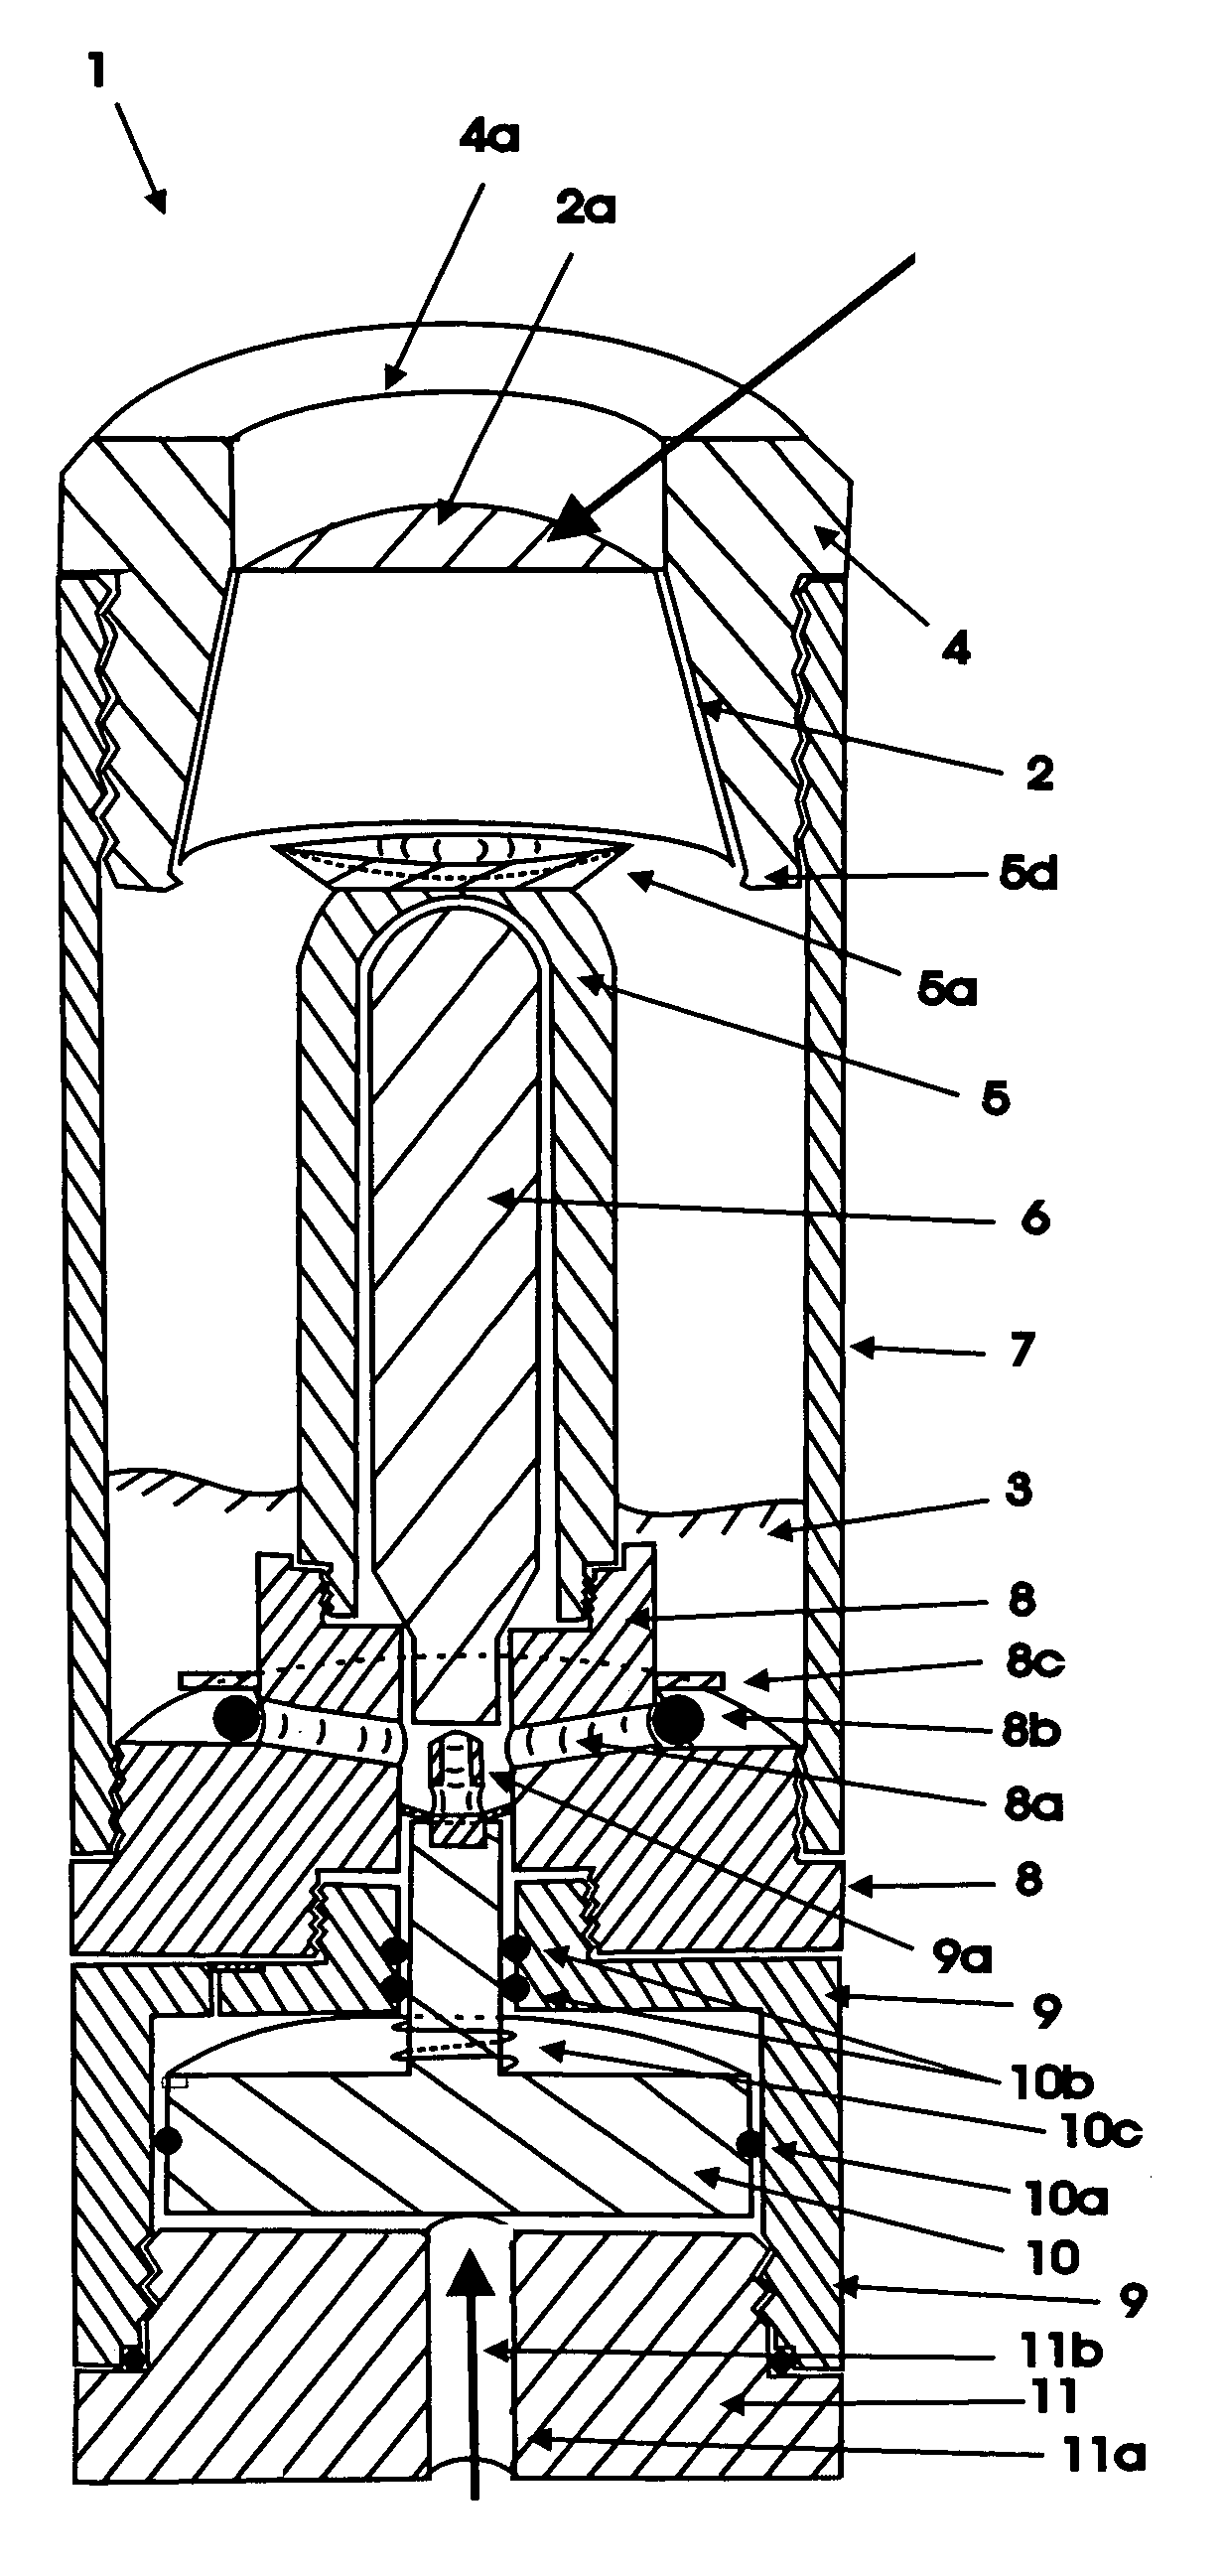 Gas projection device sometimes with a burst disk, producing loud sonic report and smoke plume